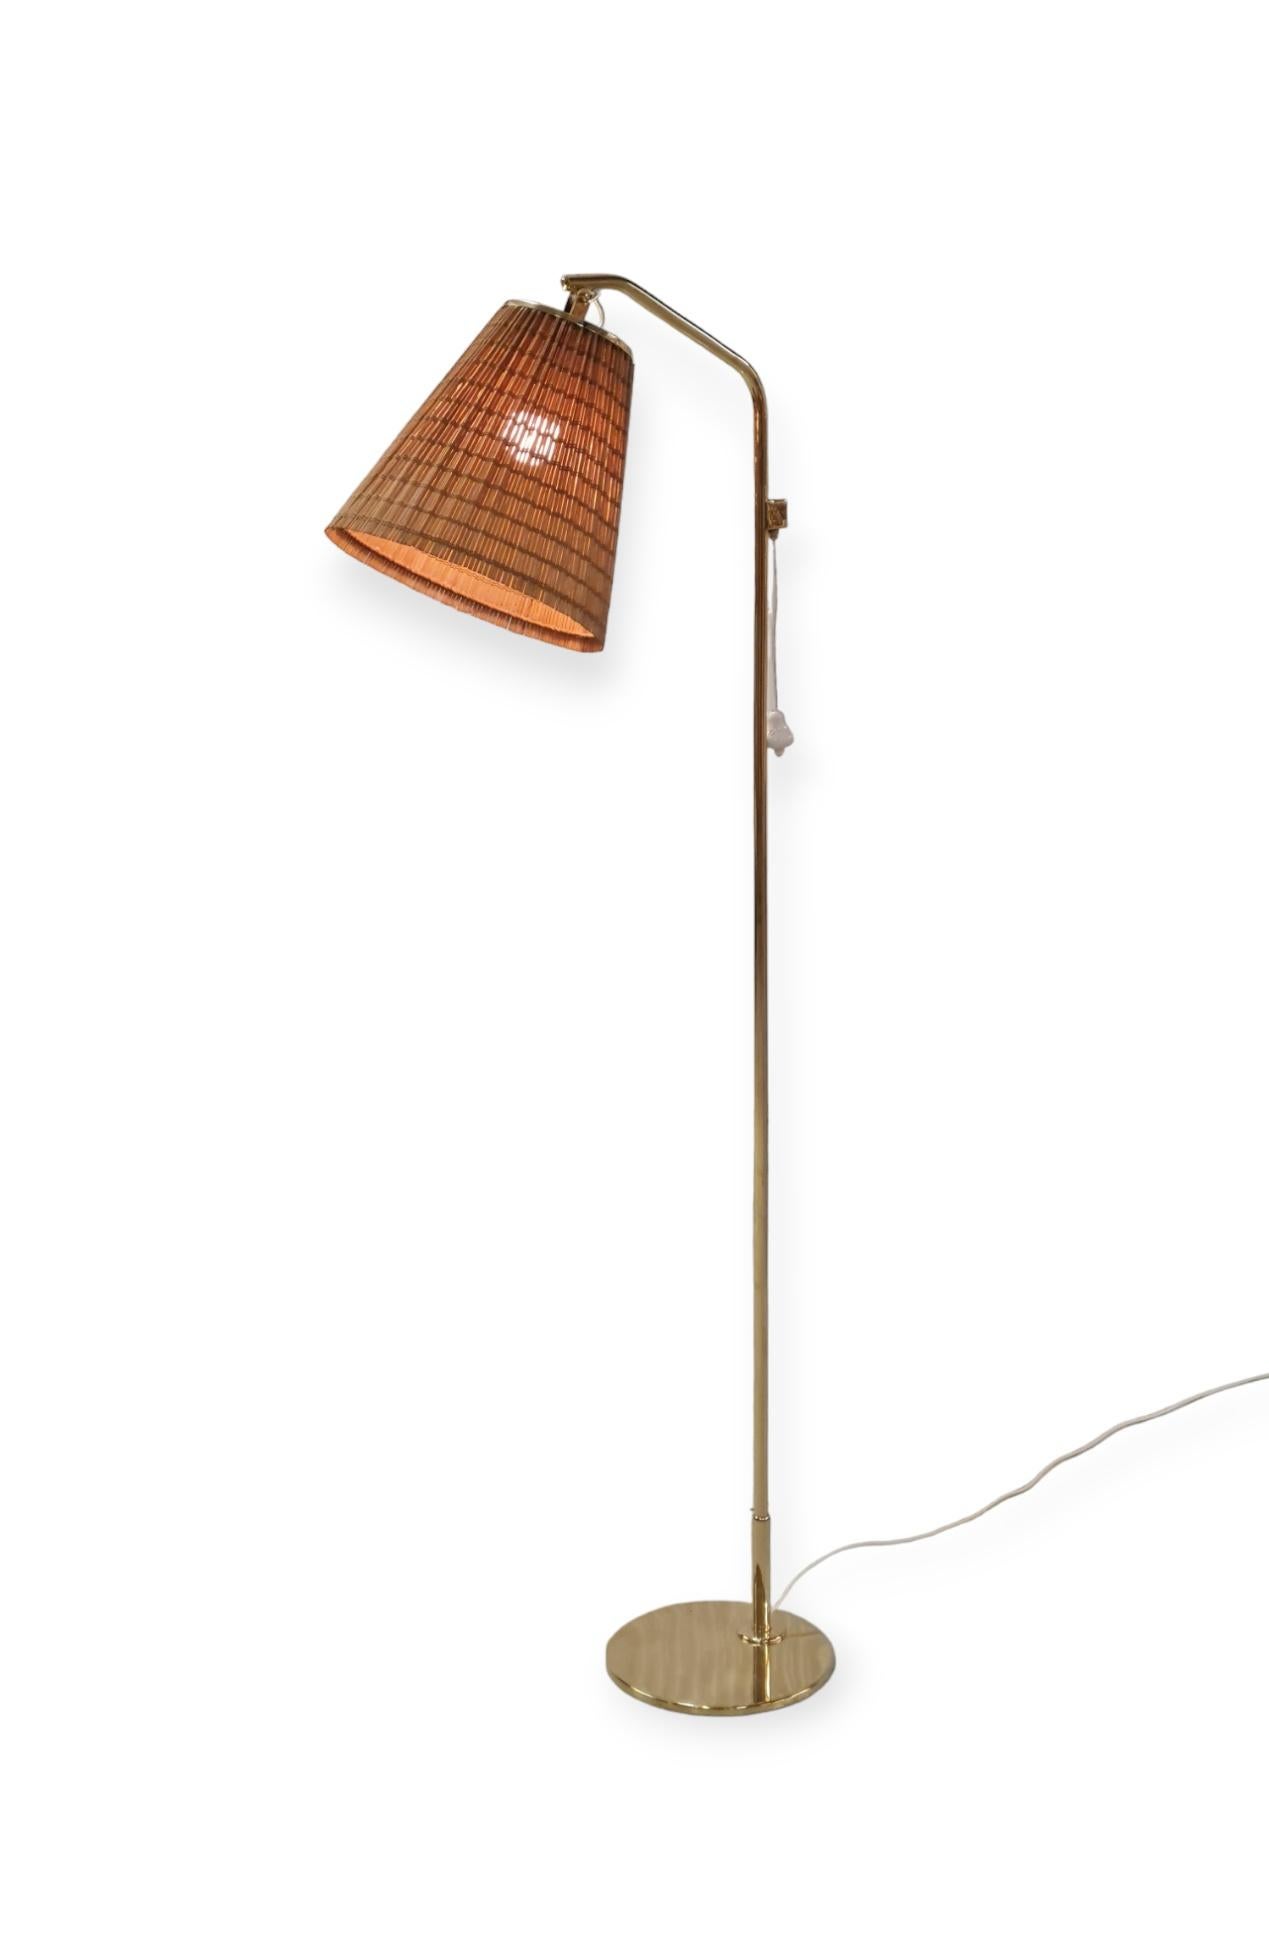 Scandinavian Modern A Paavo Tynell Floor Lamp Model 9613 with Rattan Shade For Sale